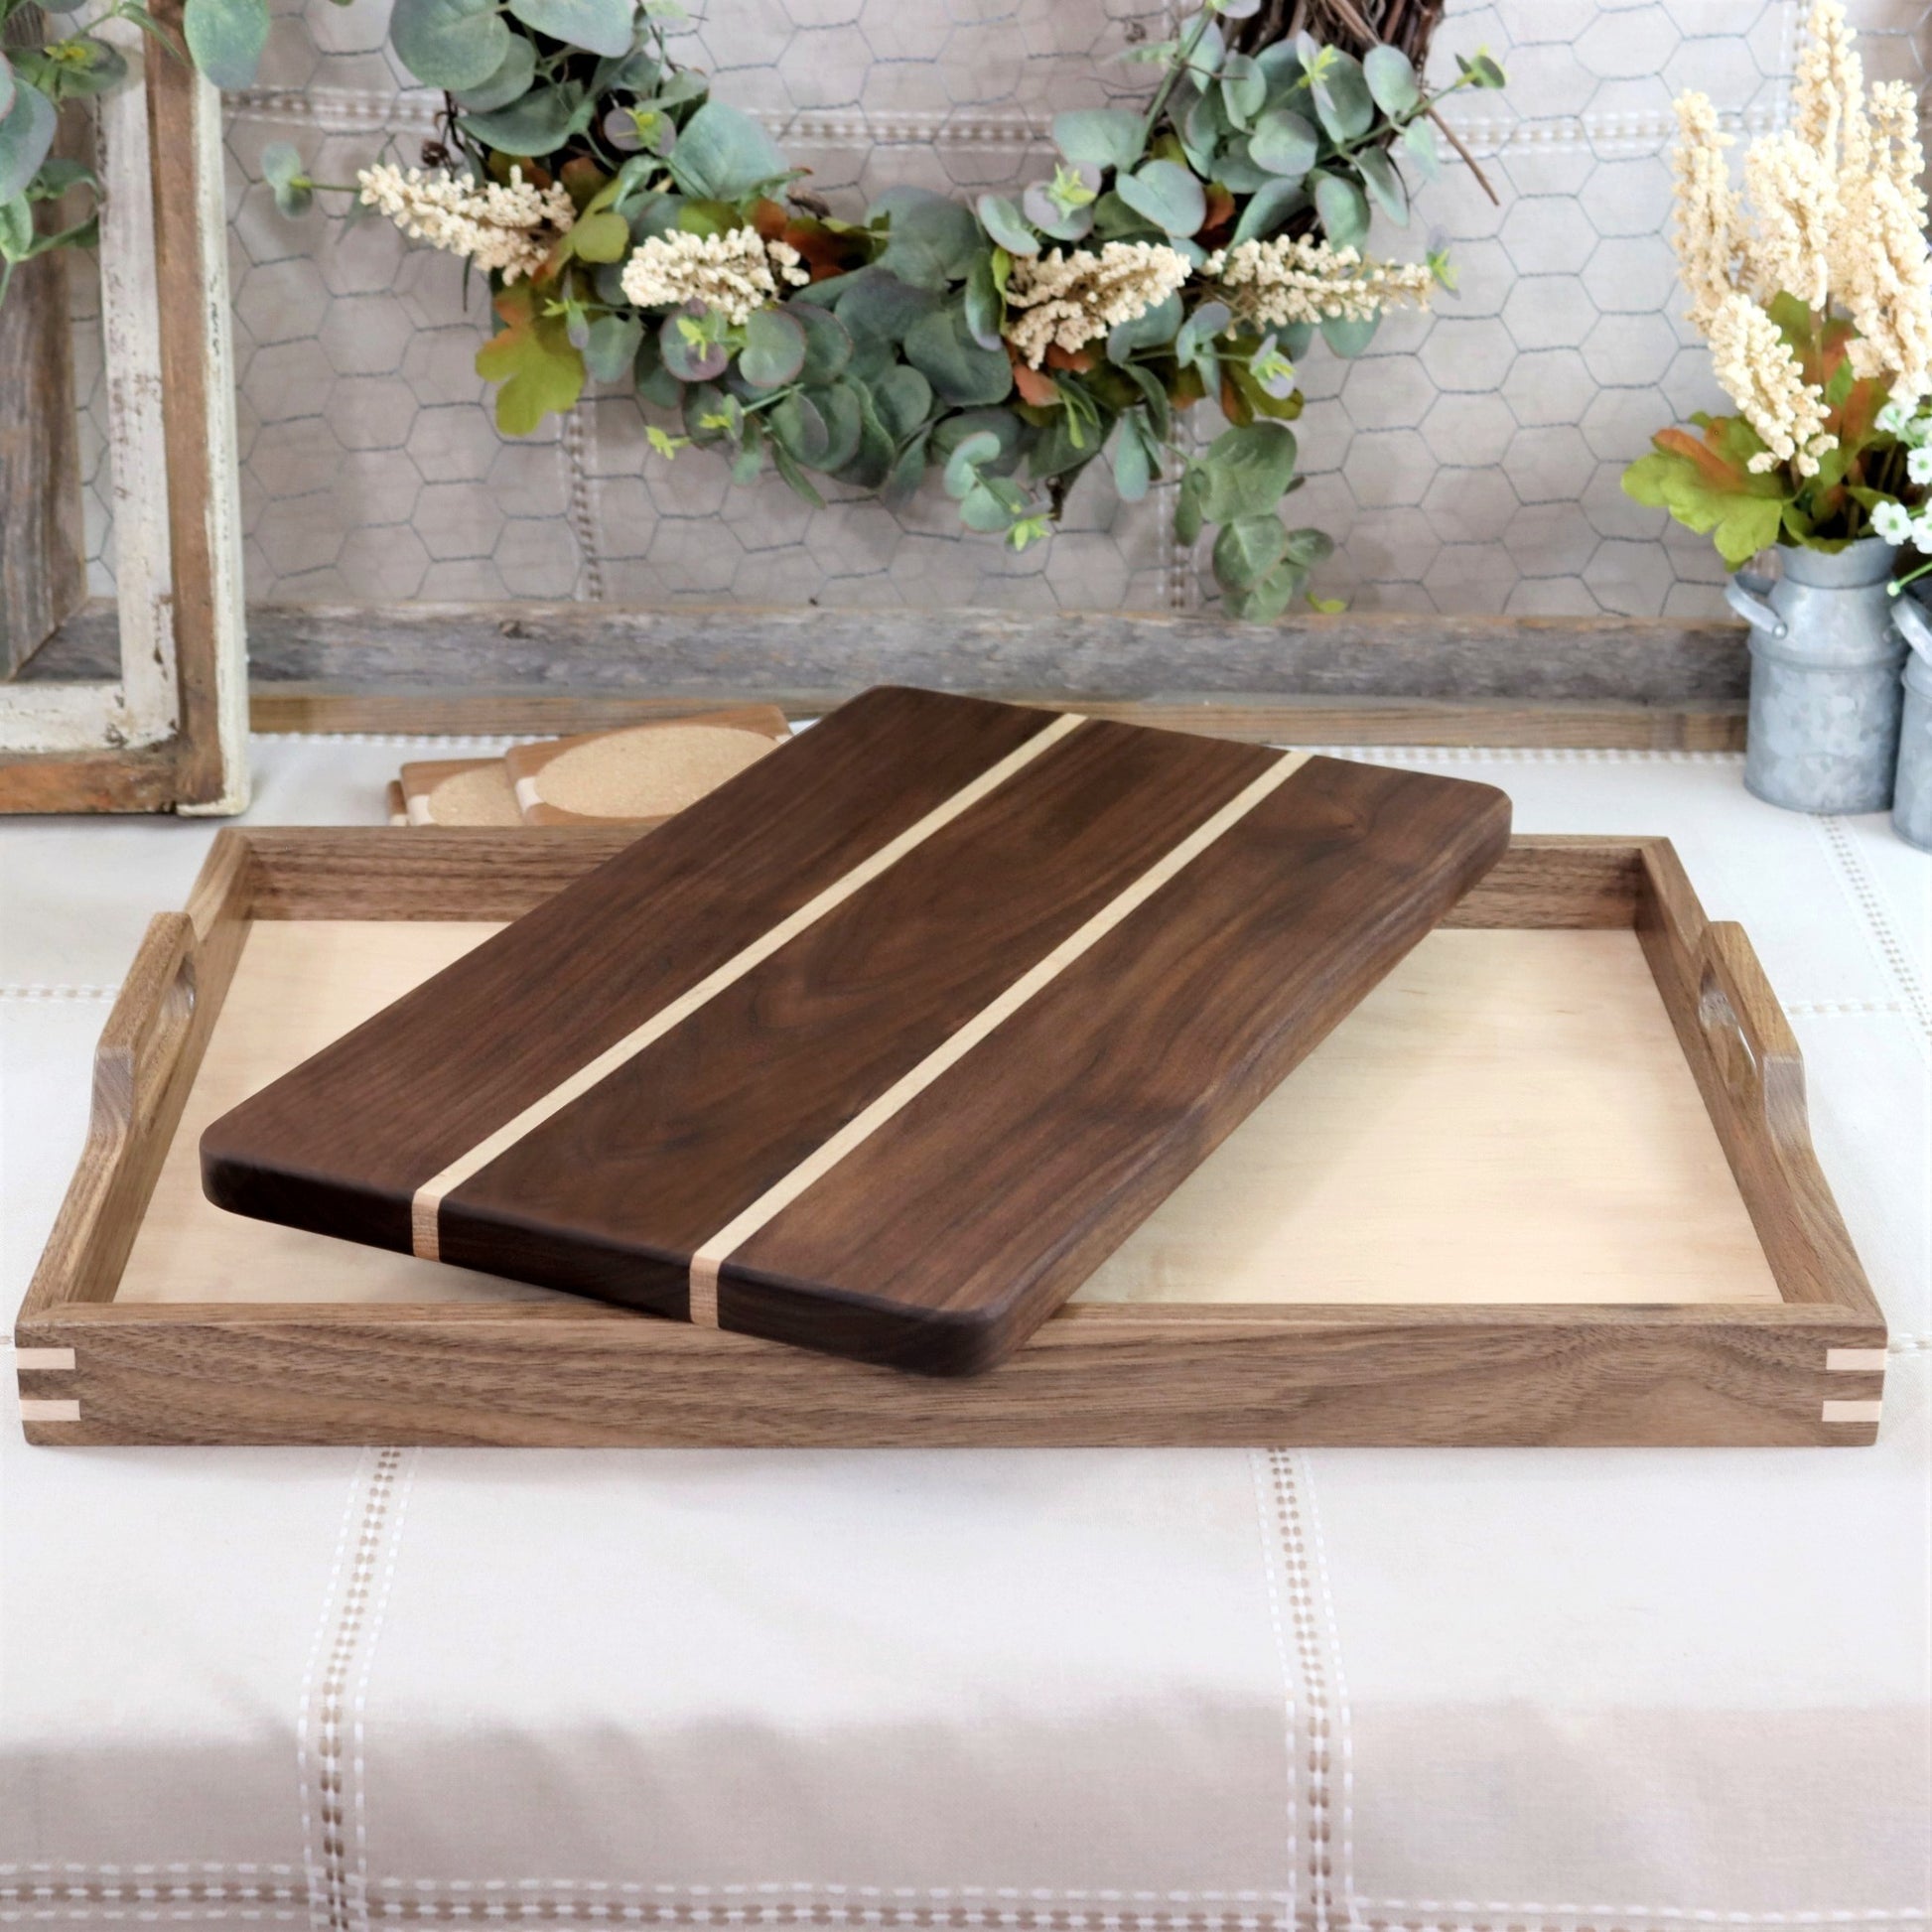 2-in-1 Large Wooden Chopping Board & Serving Tray - by LARHN